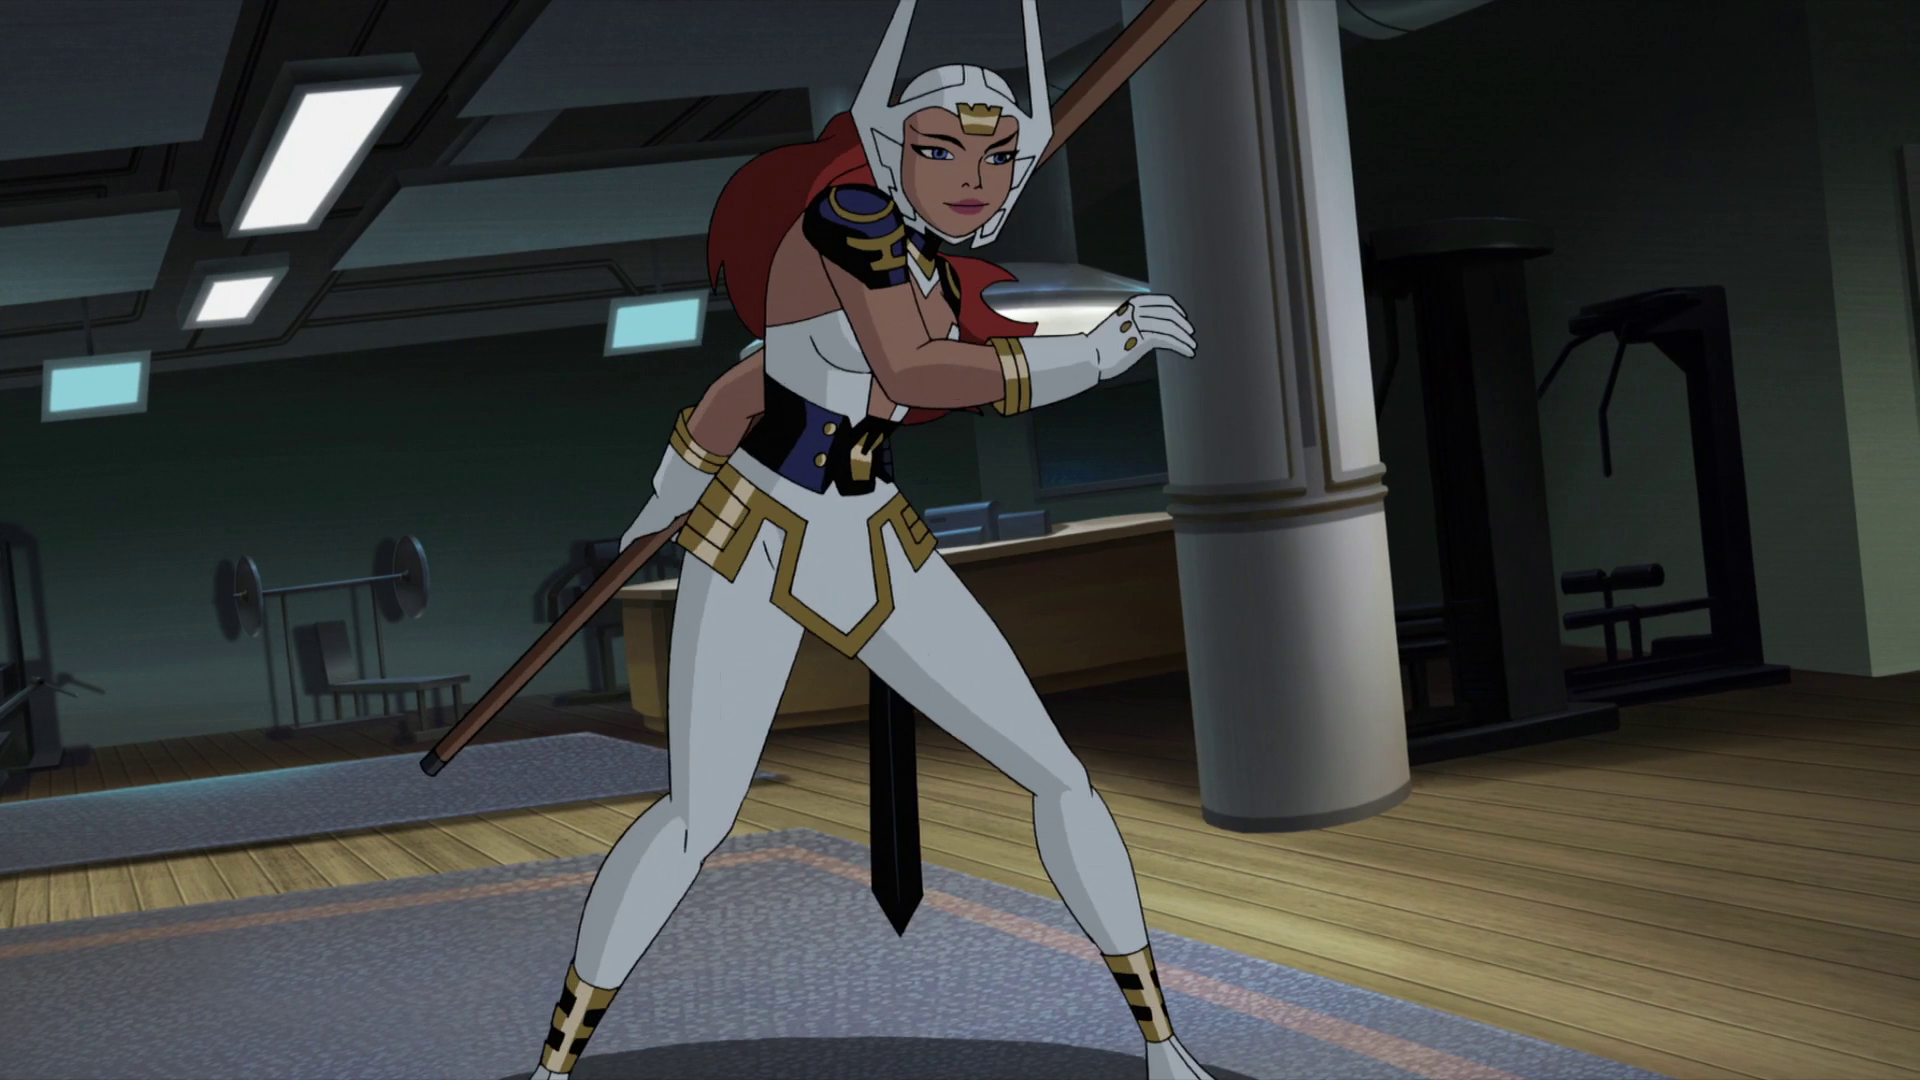 The World's Finest - Justice League: Gods and Monsters